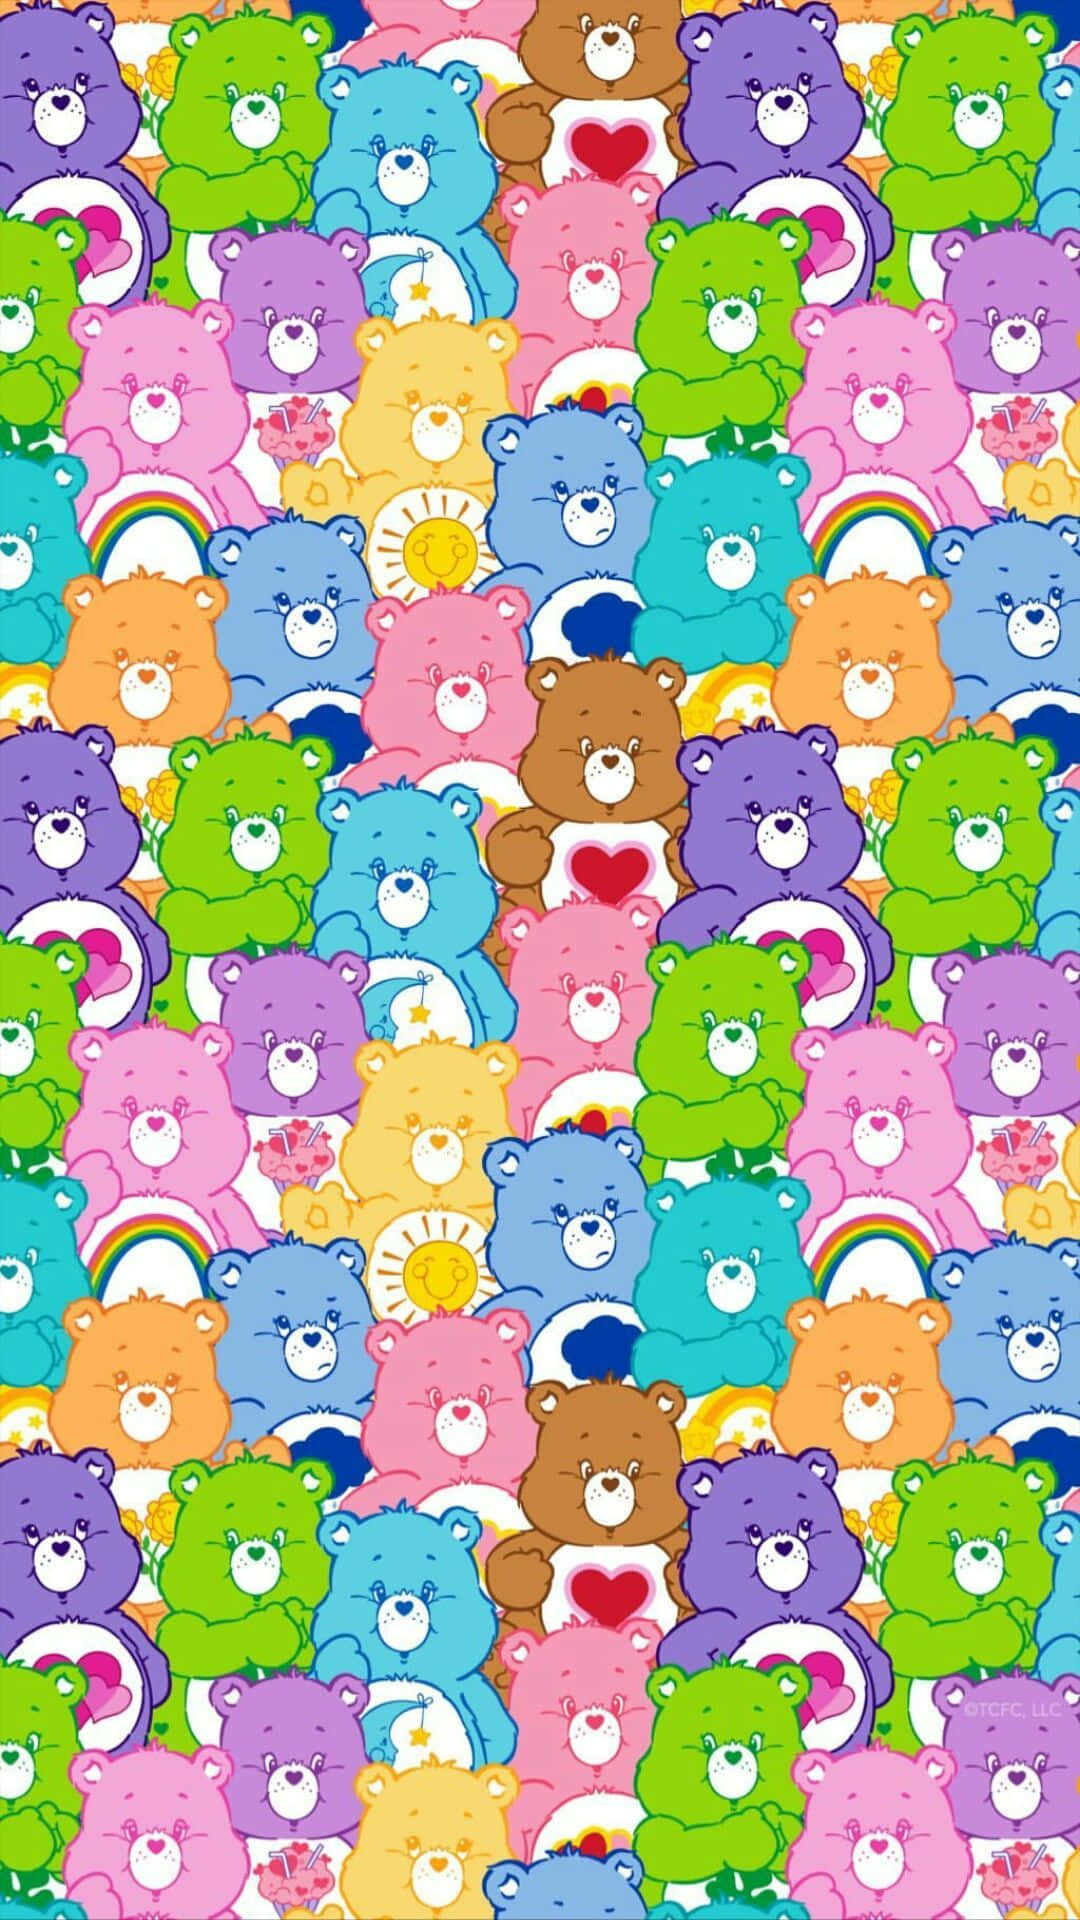 Colorful Teddy Bears Kidcore Aesthetic Background